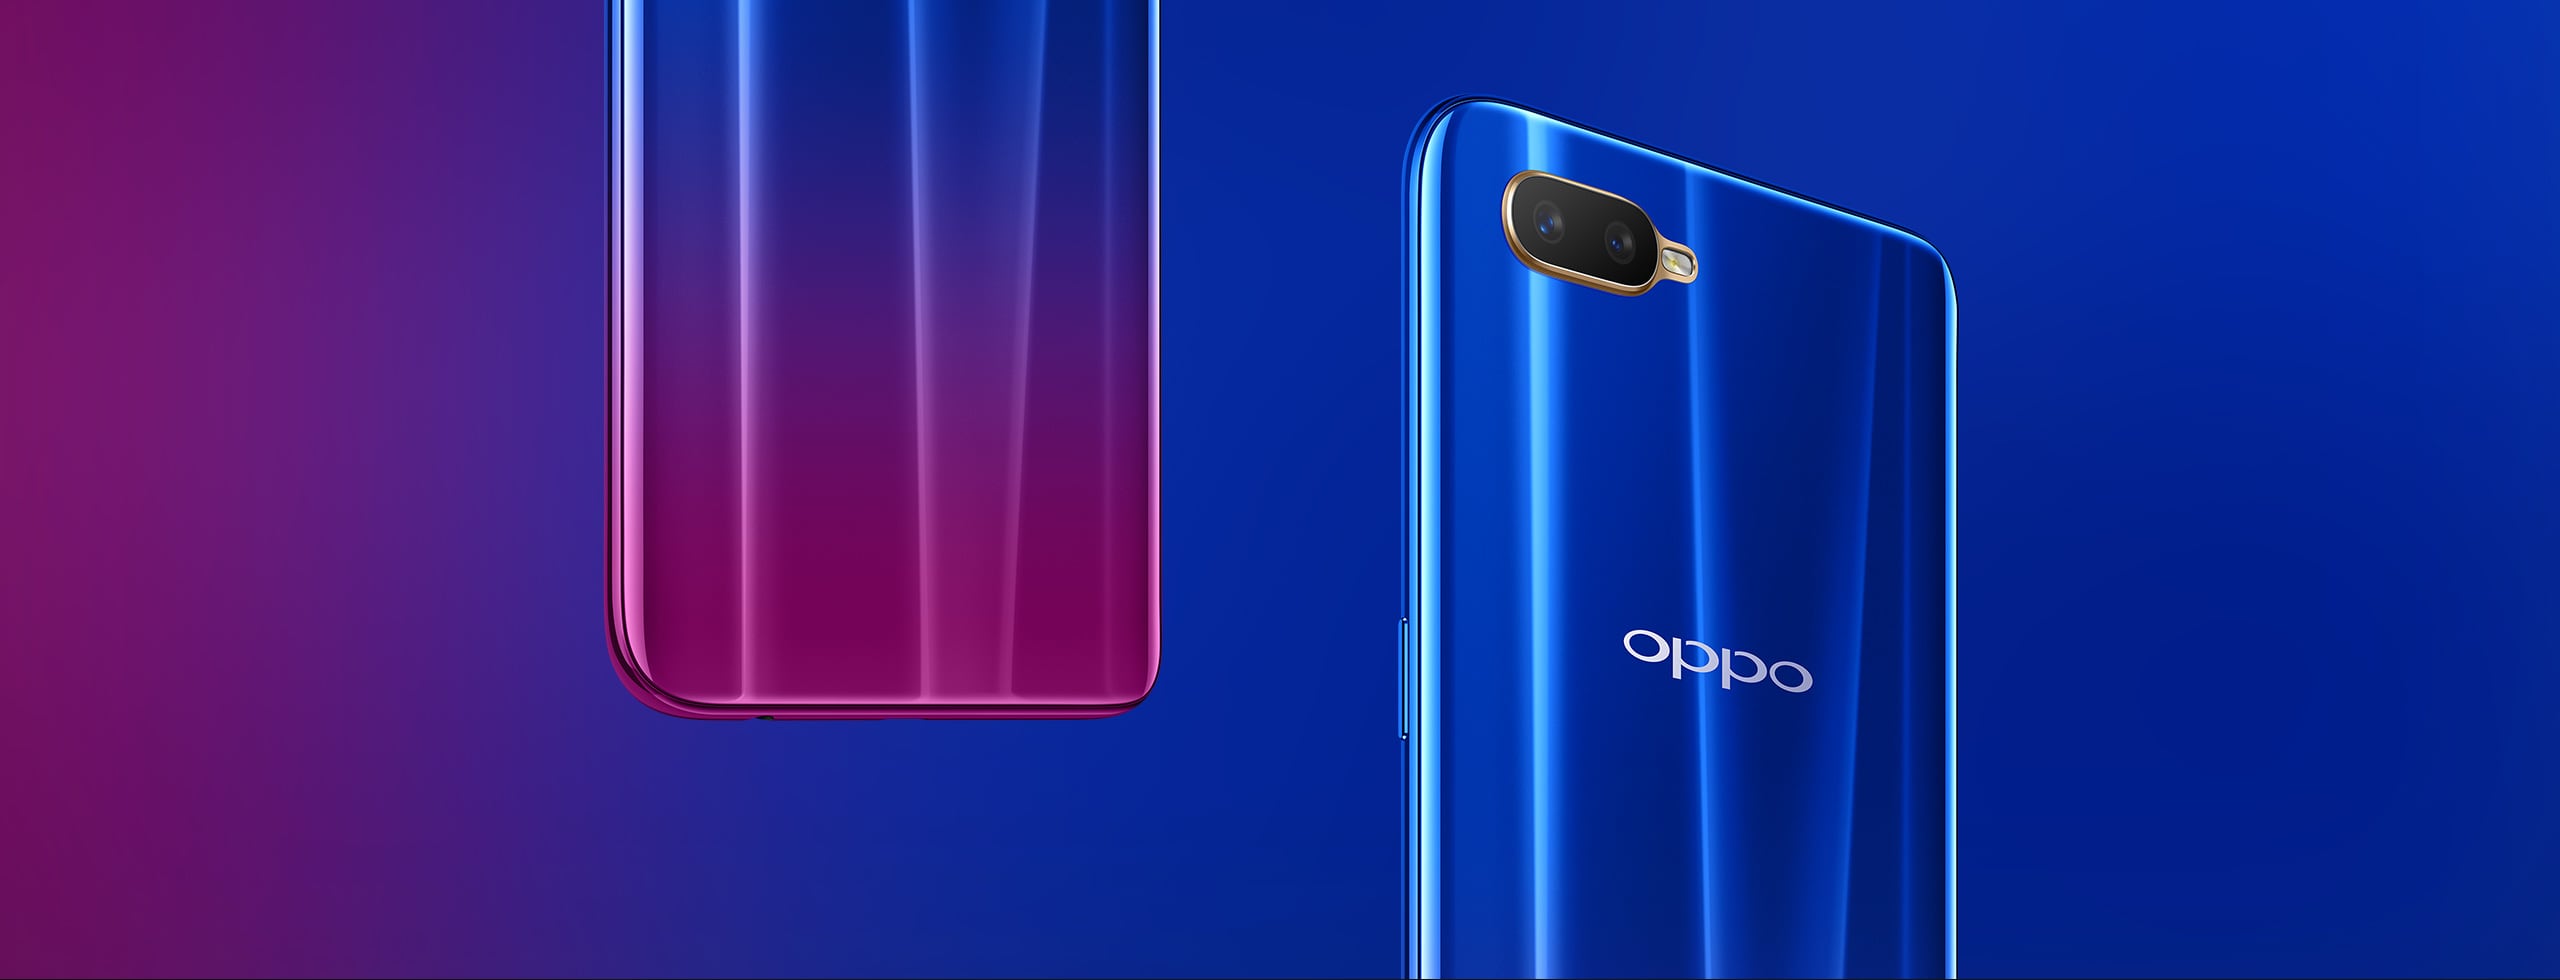 oppo-rx17-neo-specs-review-release-date-phonesdata